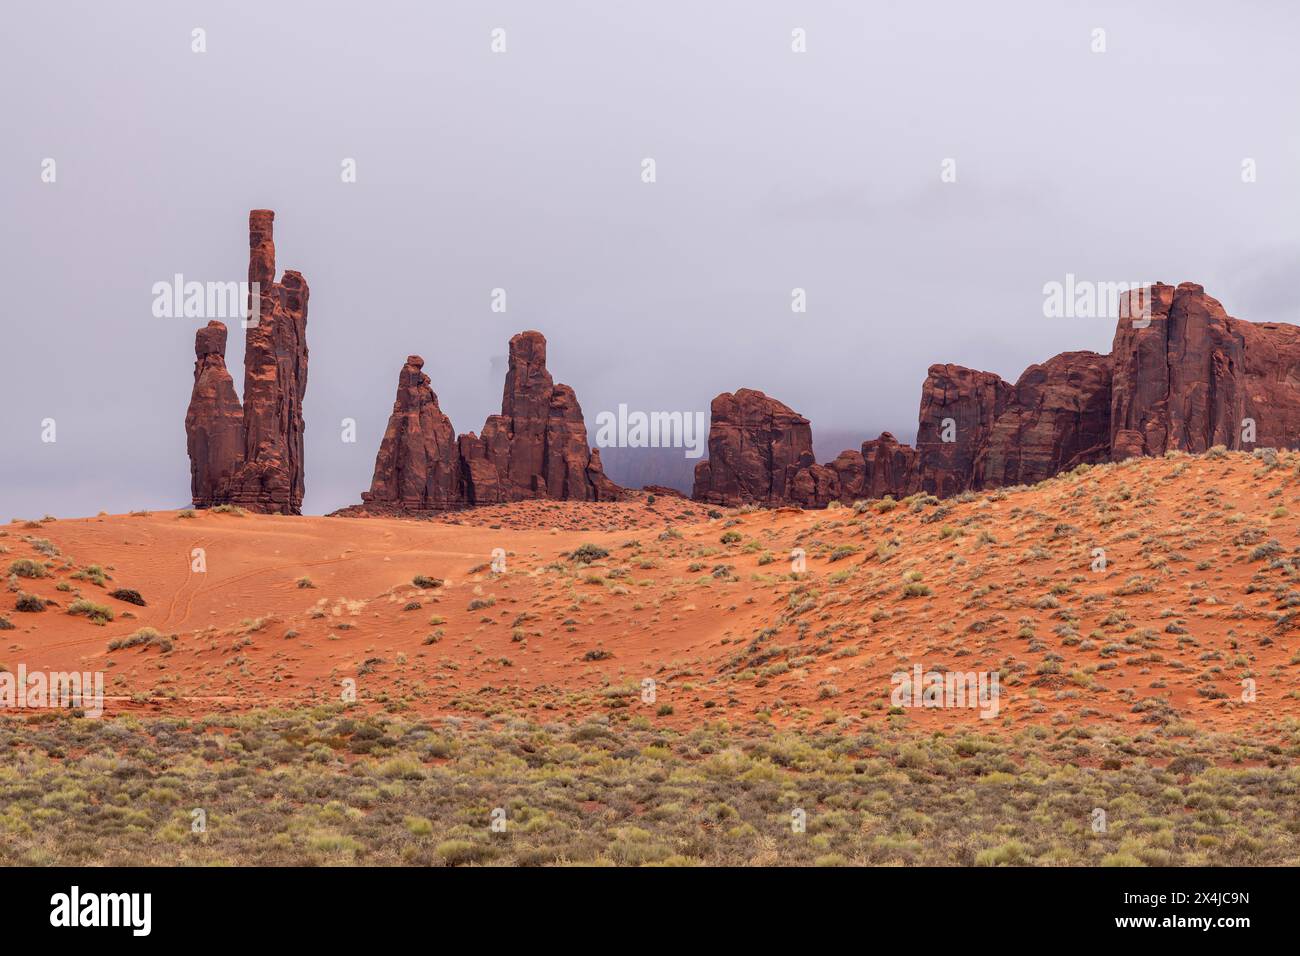 Many areas within Monument Valley show significant consequences of erosion as much of the rock is soft sandstone. Stock Photo